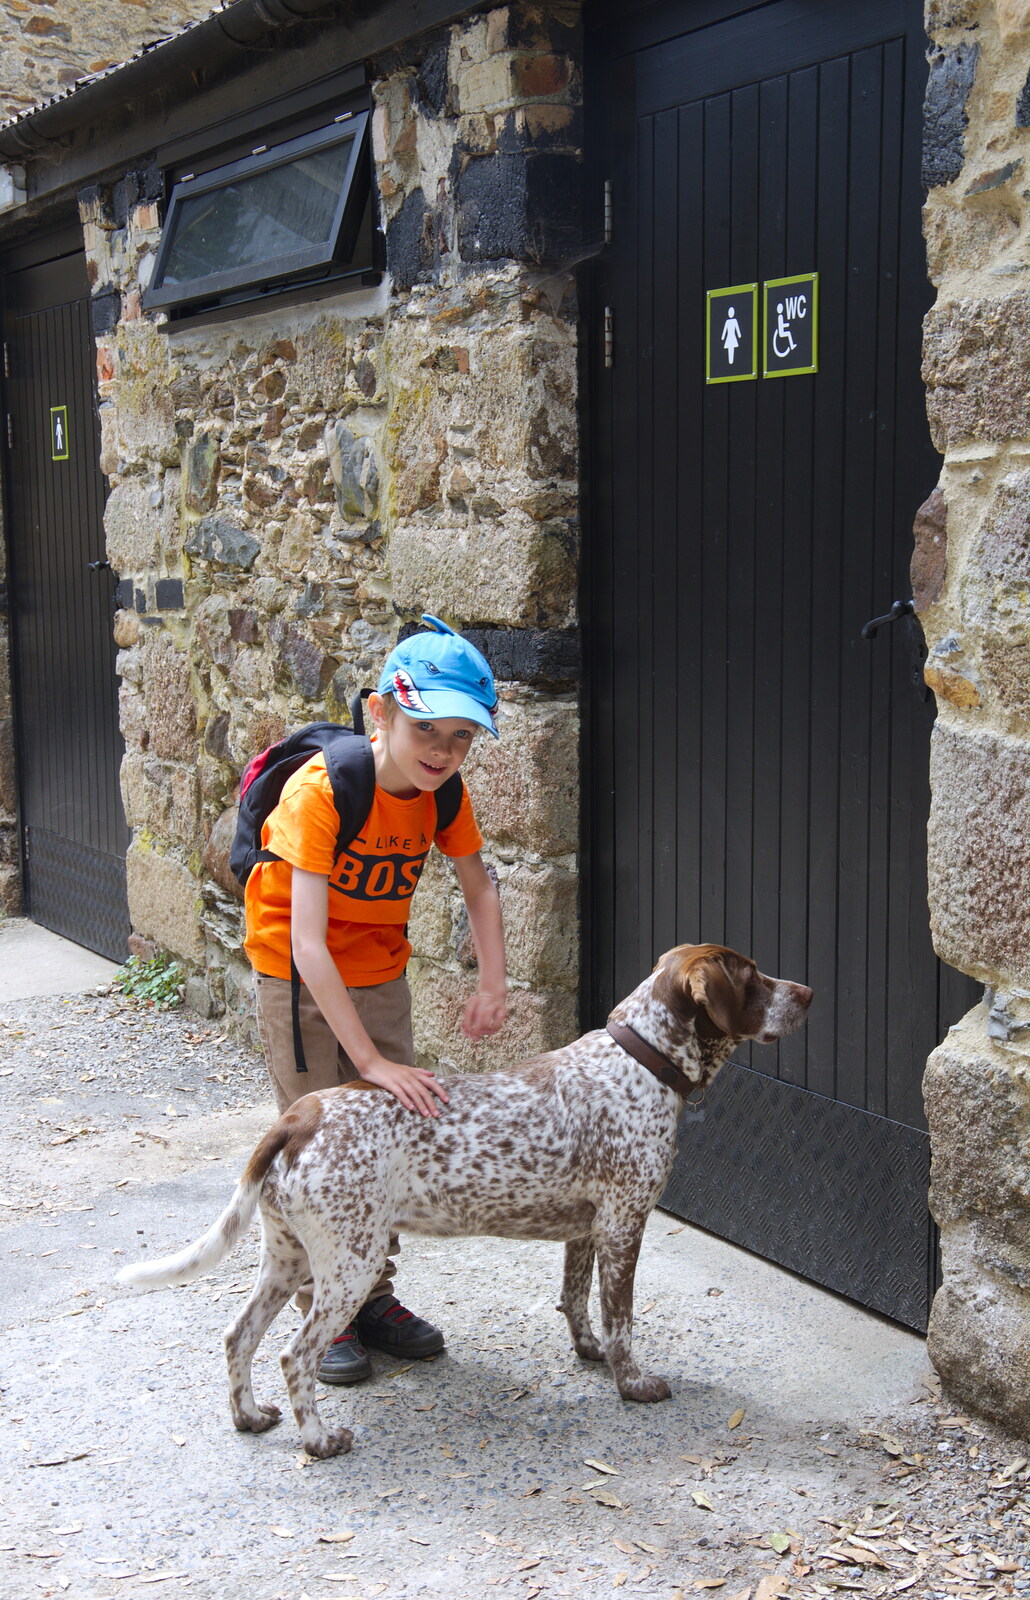 Chagford Lido and a Trip to Parke, Bovey Tracey, Devon - 25th May 2019: Harry strokes the pining dog